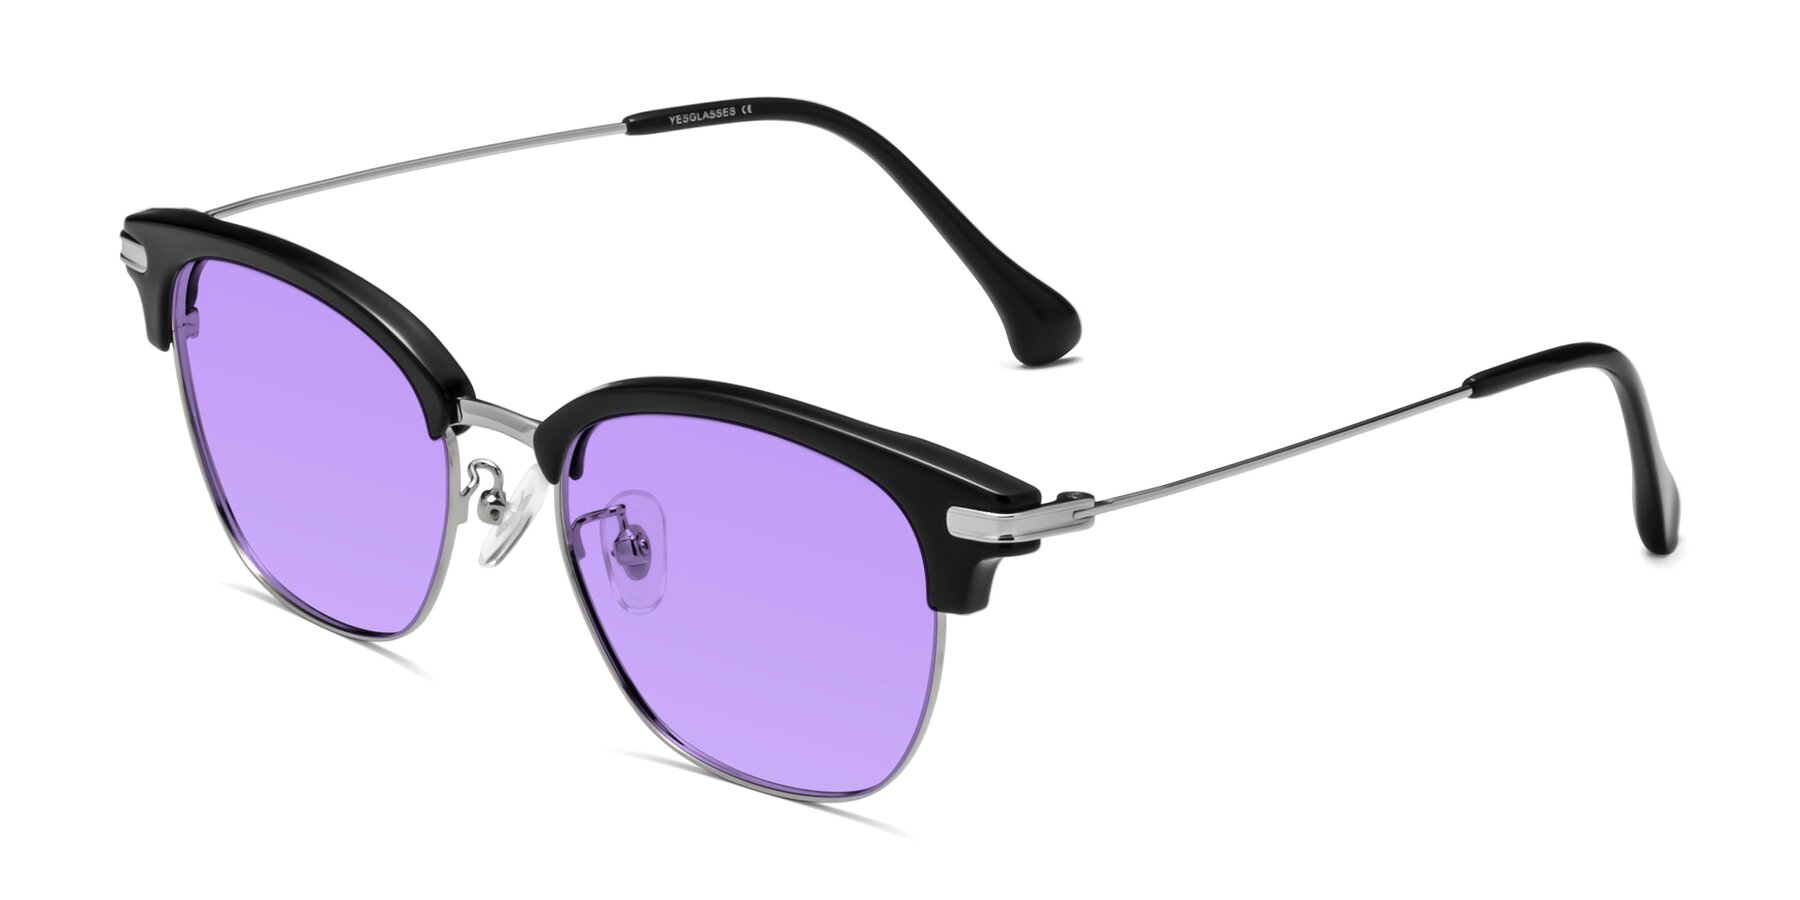 Angle of Obrien in Black-Sliver with Medium Purple Tinted Lenses